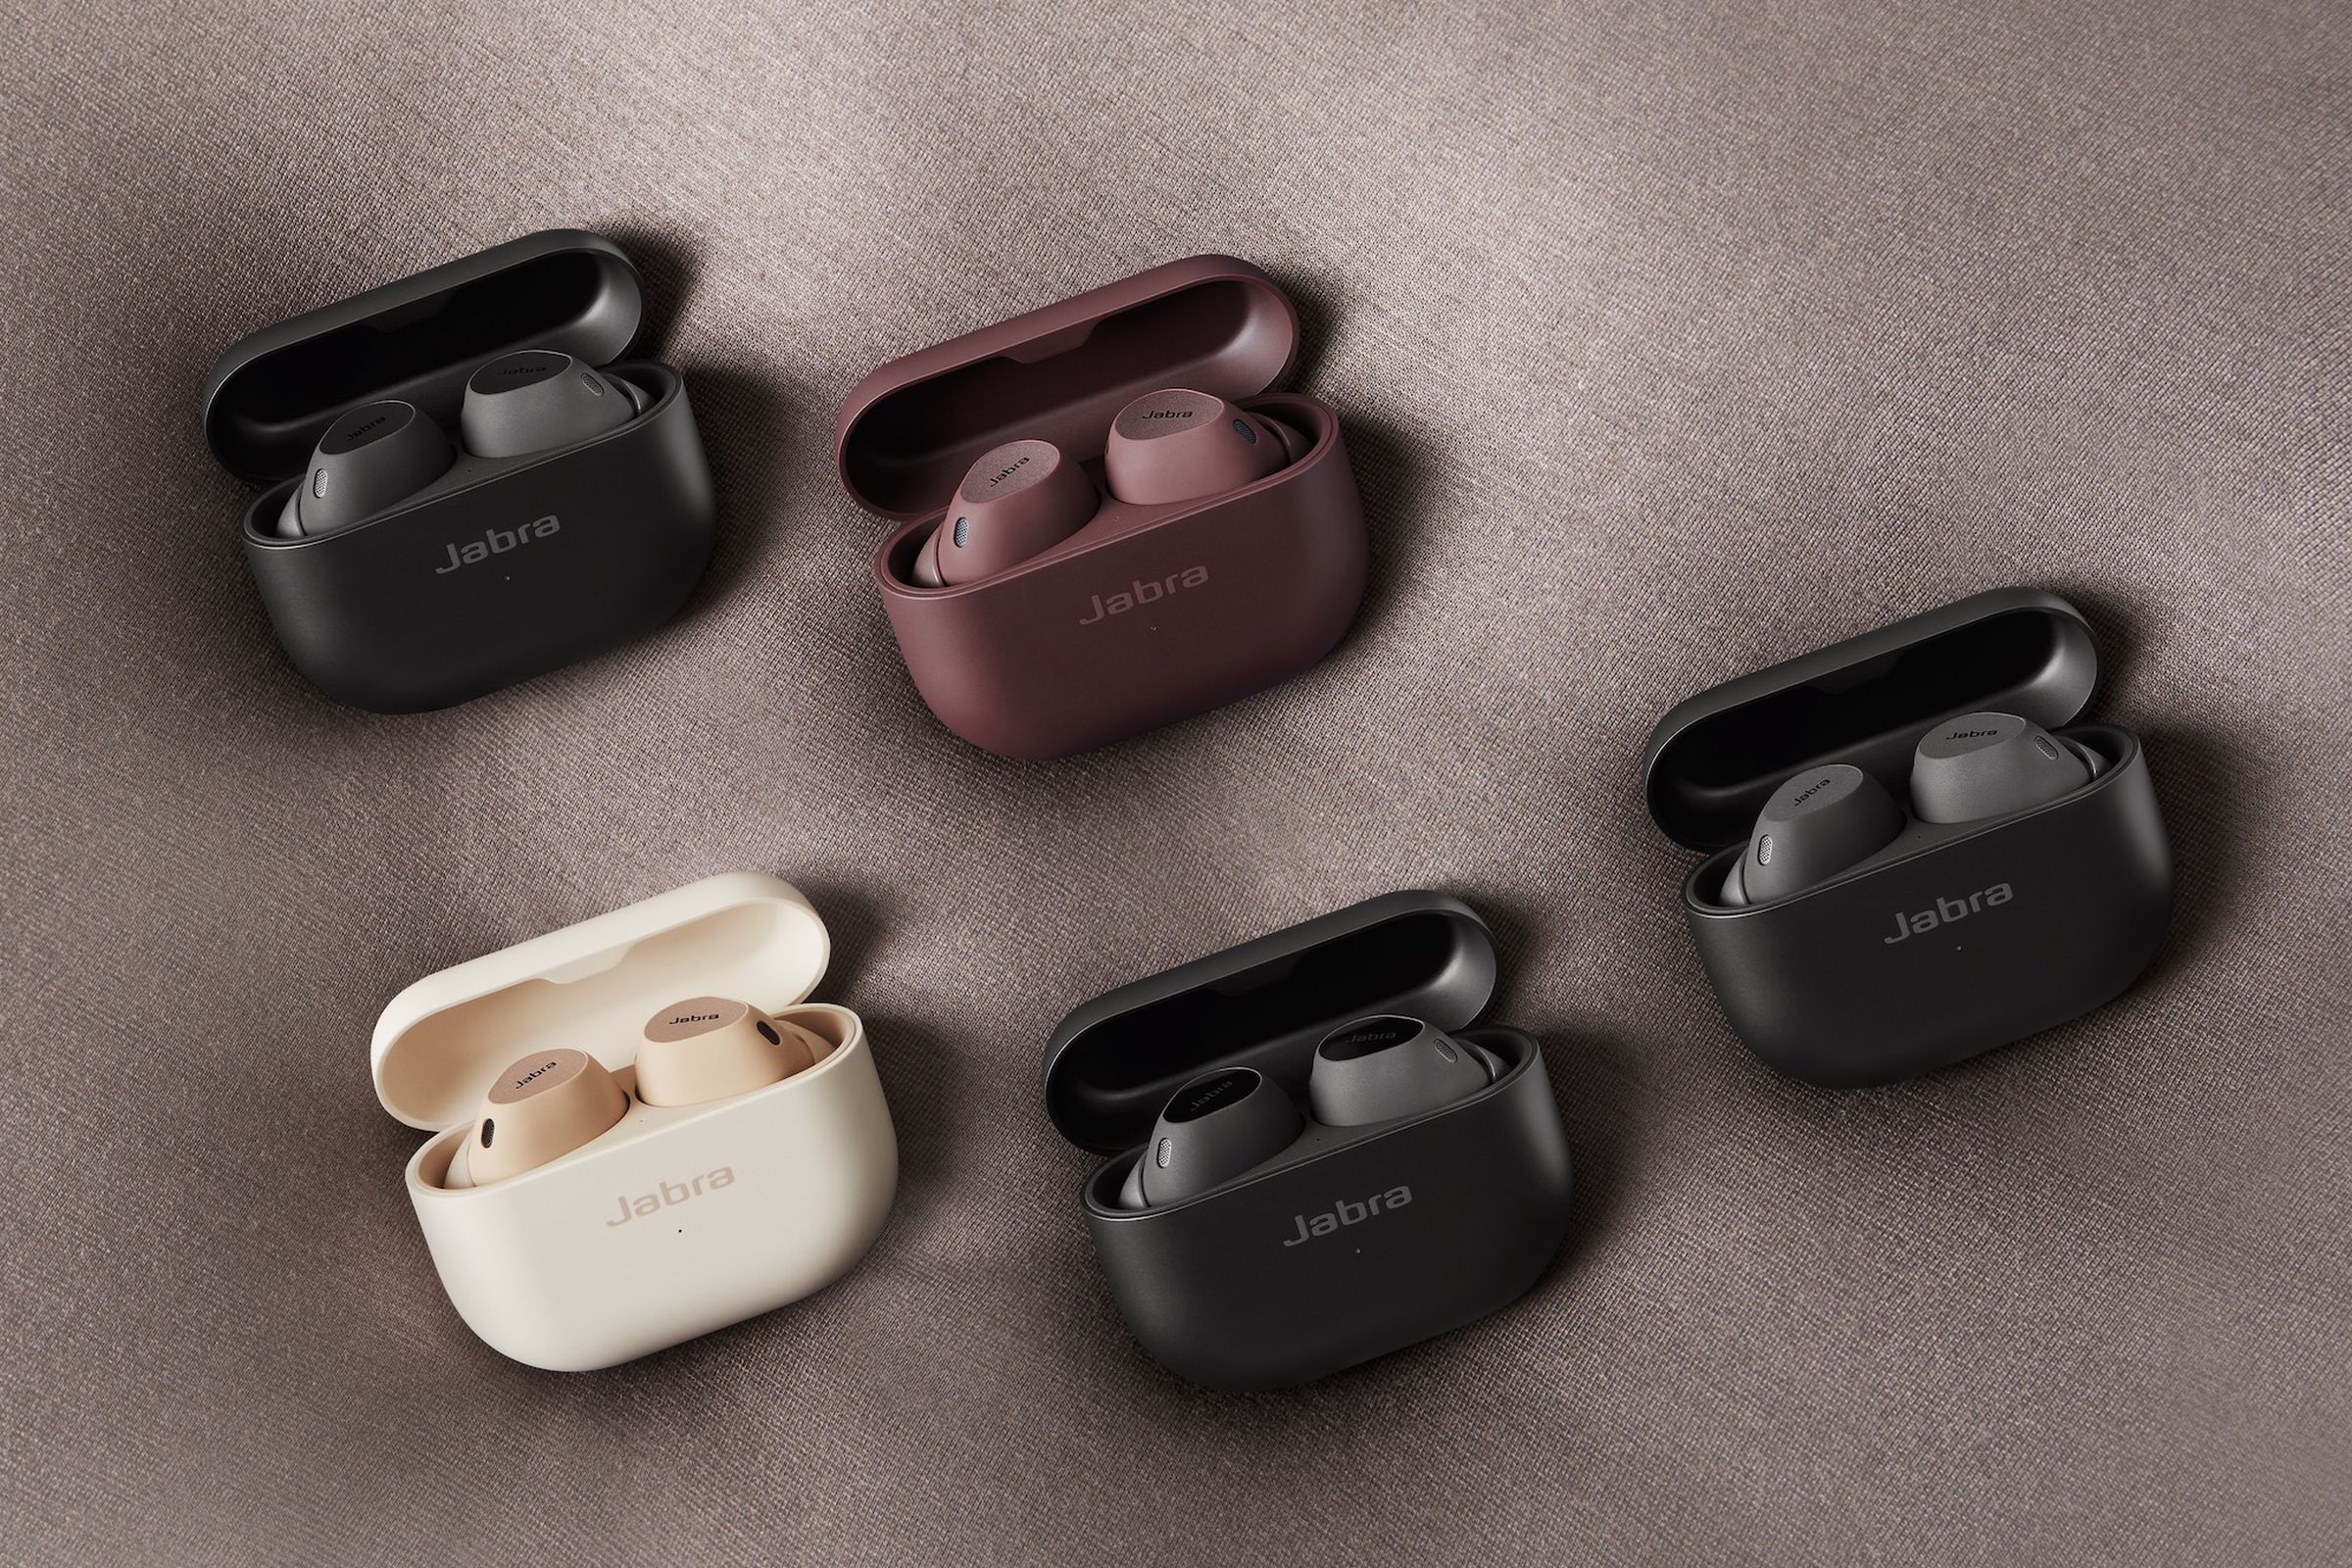 A marketing image showing the different colors of Jabra’s Elite 10 earbuds.